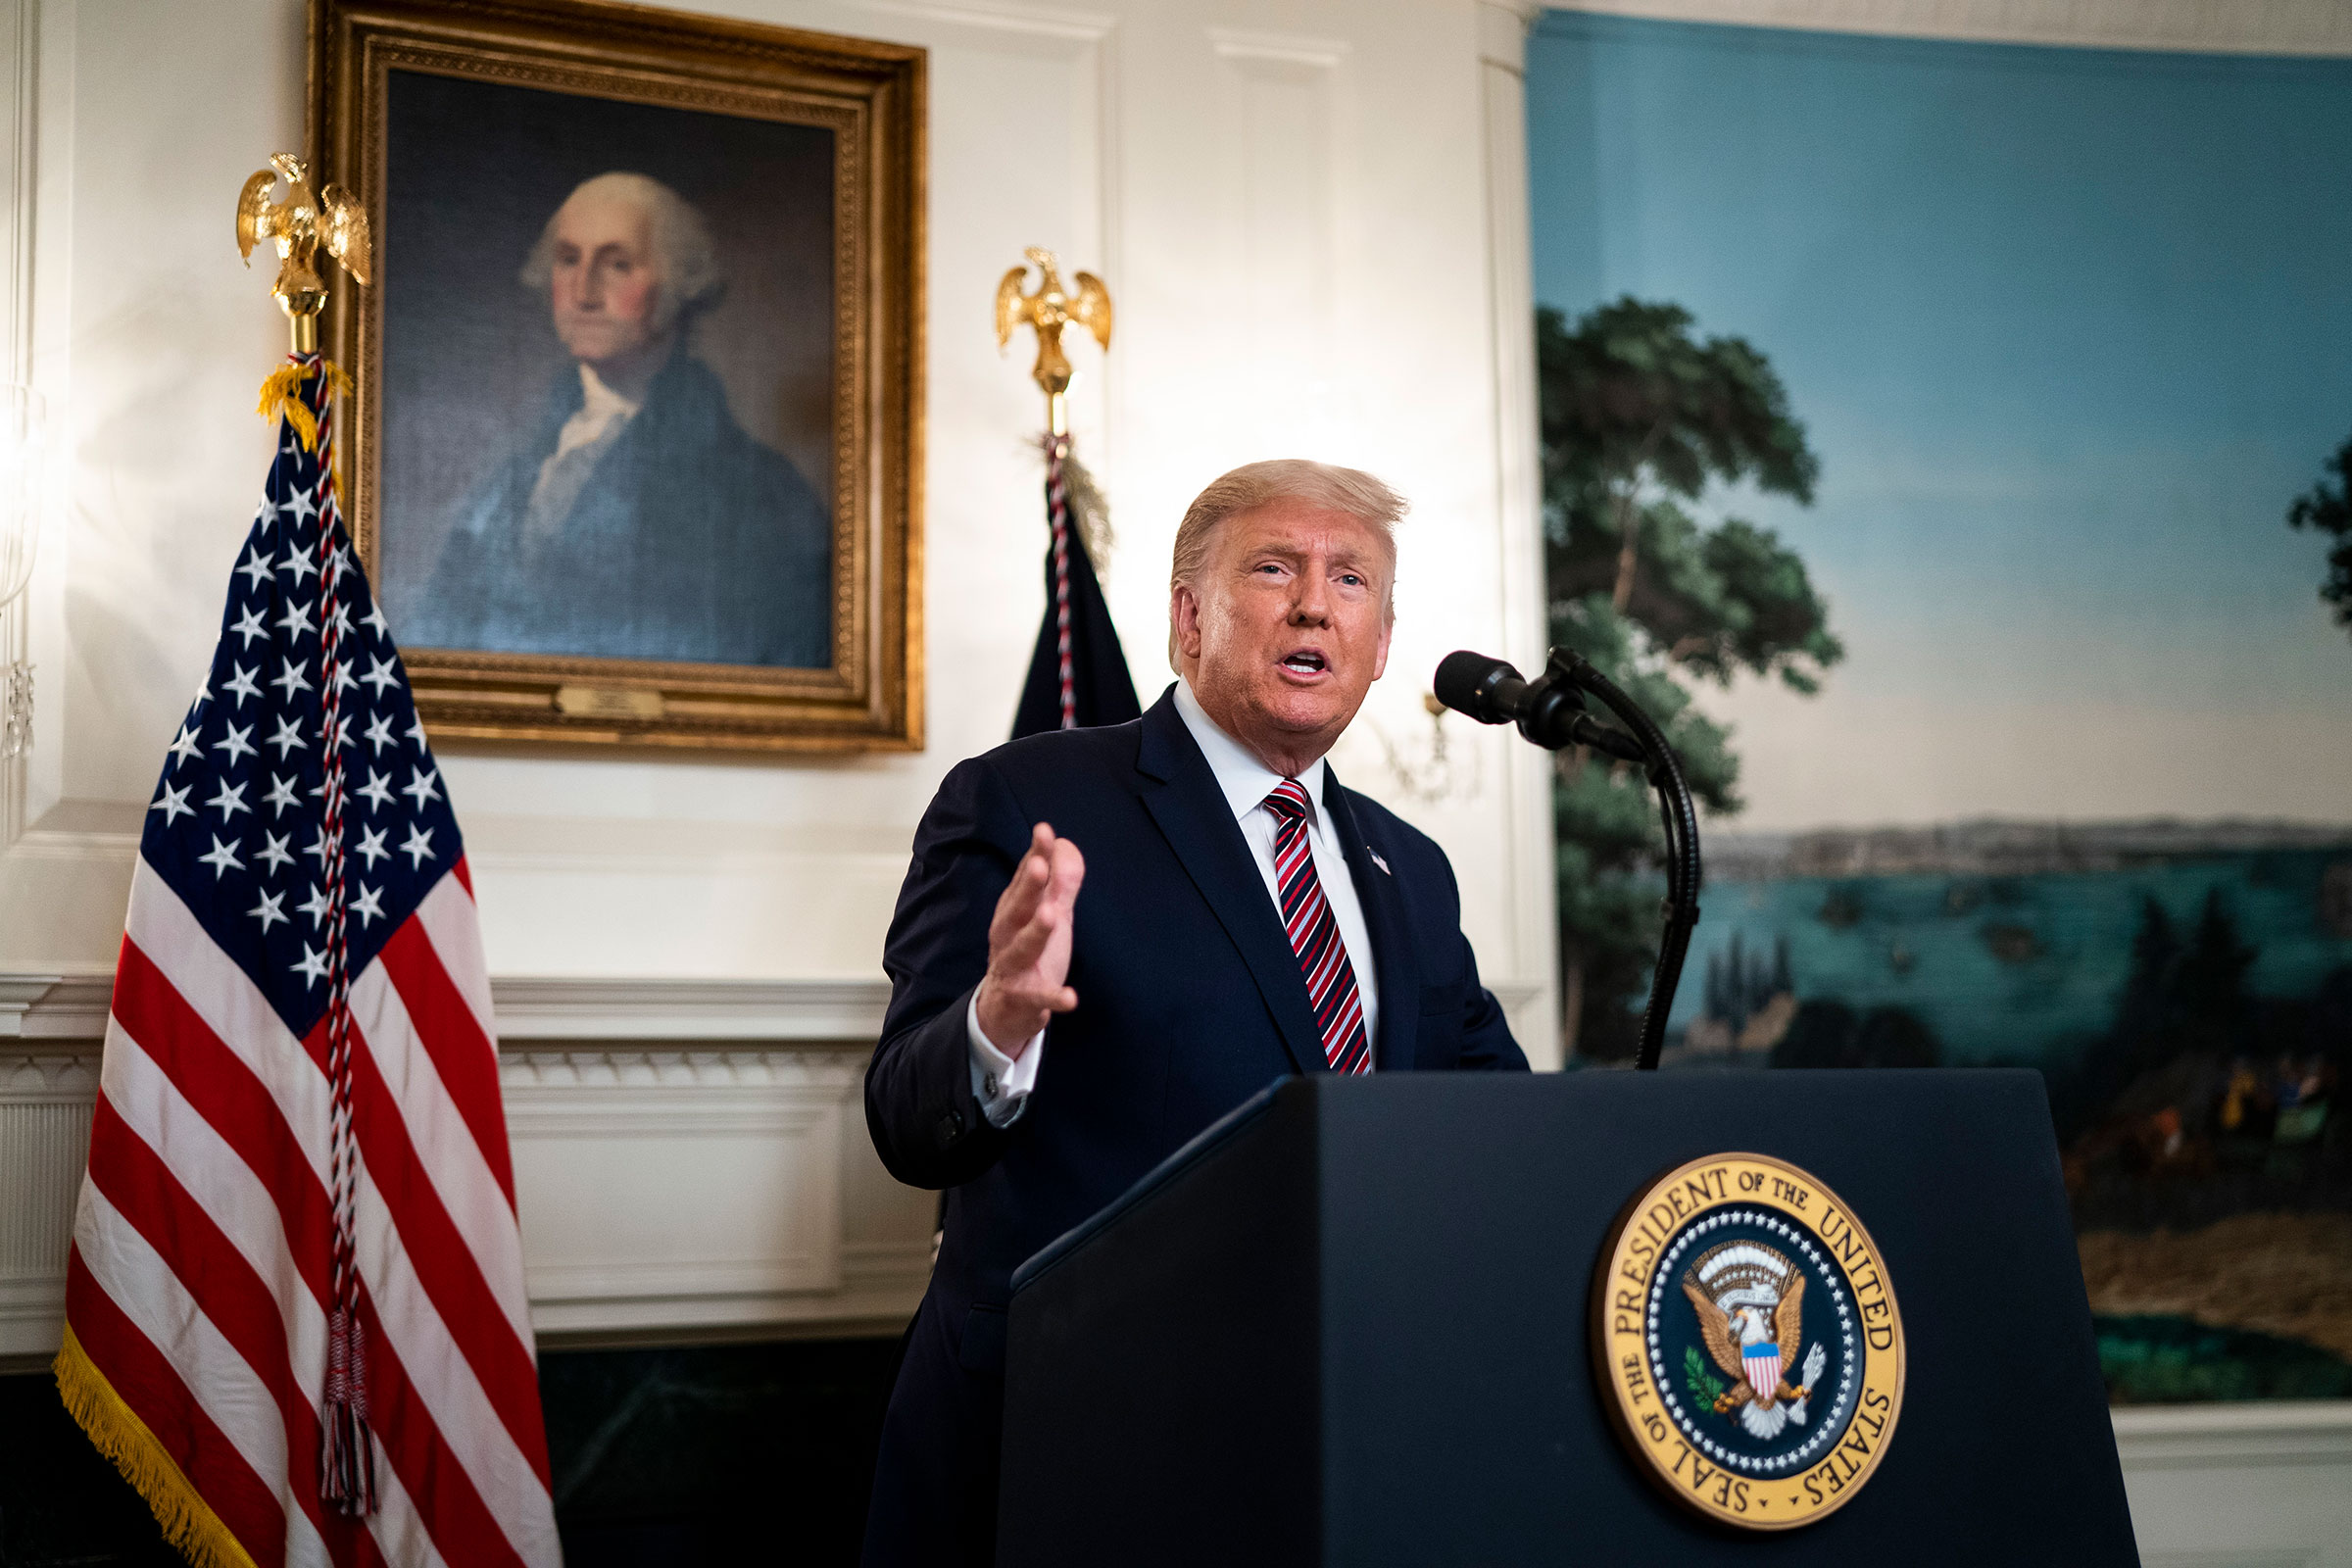 President Donald Trump announces his list of potential Supreme Court nominees in the Diplomatic Reception Room of the White House on Sept. 9, 2020. (Doug Mills—Pool/Getty Images)